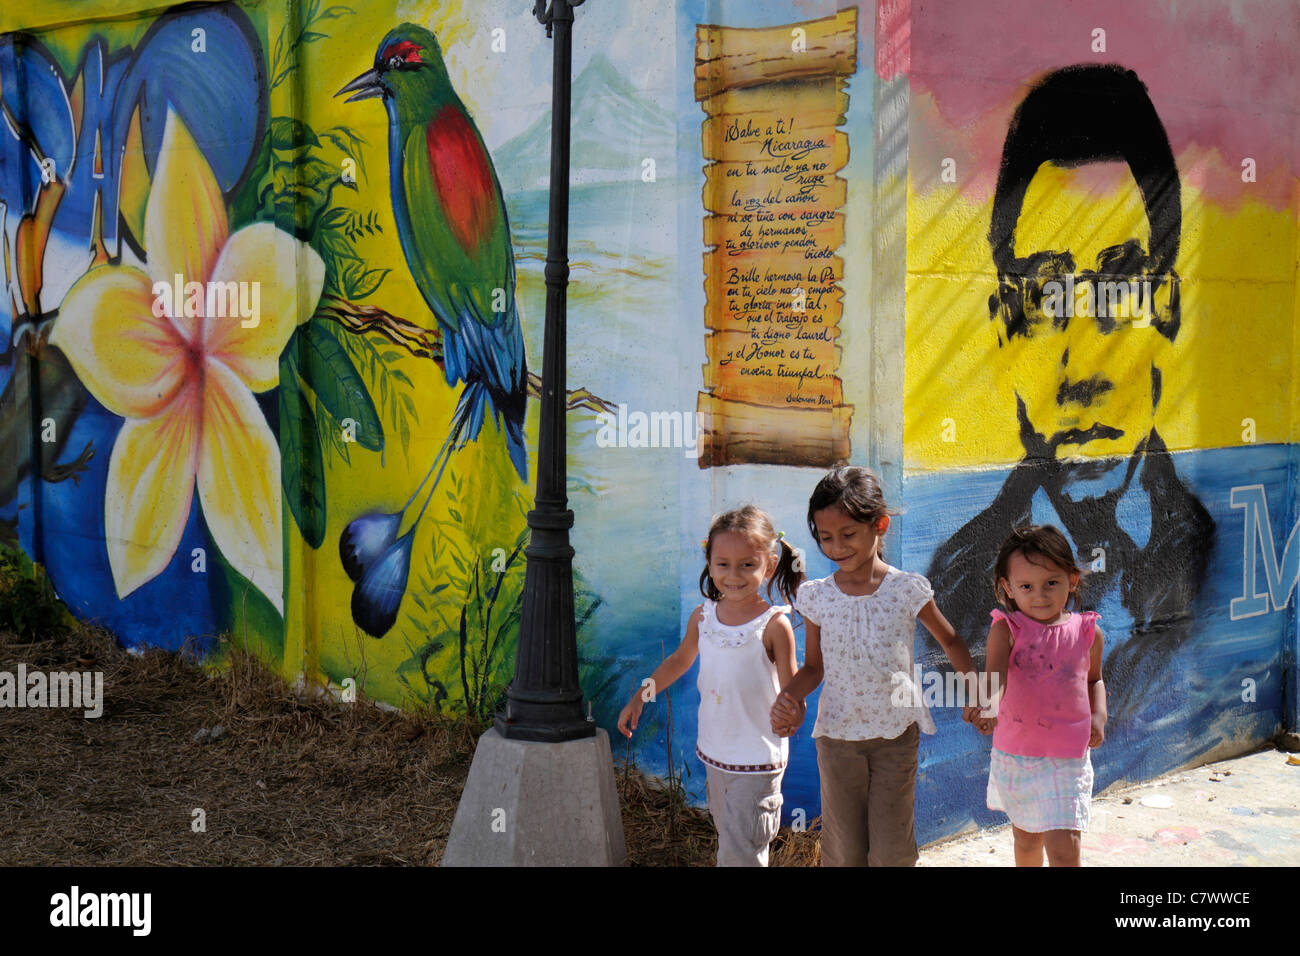 Managua Nicaragua,Calle Colon,public art,mural,colorful,bird,flower,person,Hispanic girl girls,youngster,female kids children child,younger,older,sibl Stock Photo